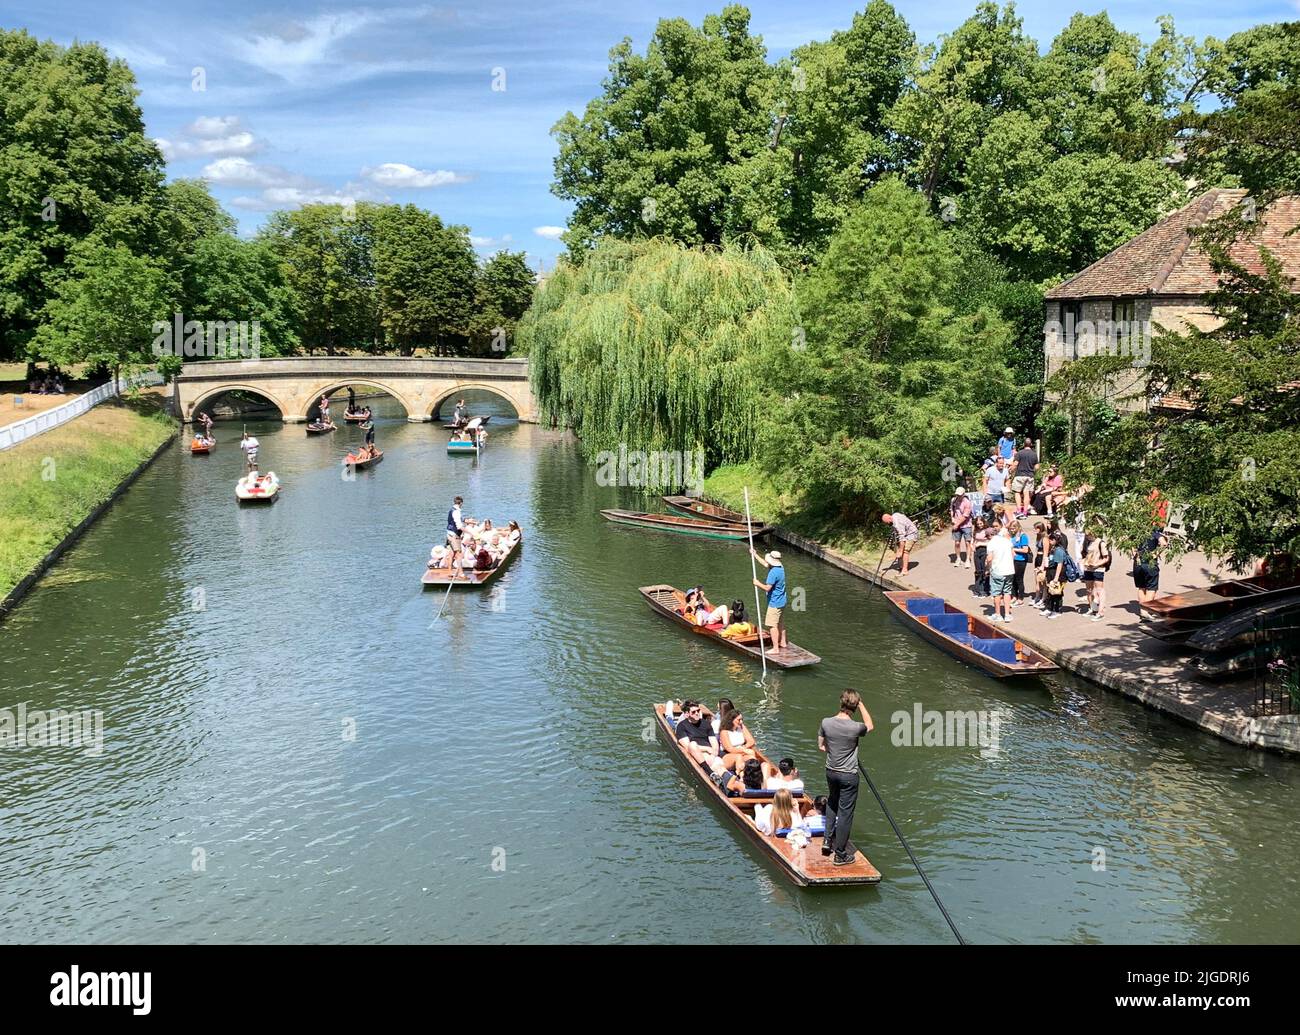 Cambridge, UK 10th July 2022. Tourists enjoy the hot weather punting on the River Cam in Cambridge. Credit: Headlinephoto/Alamy Live News. Stock Photo